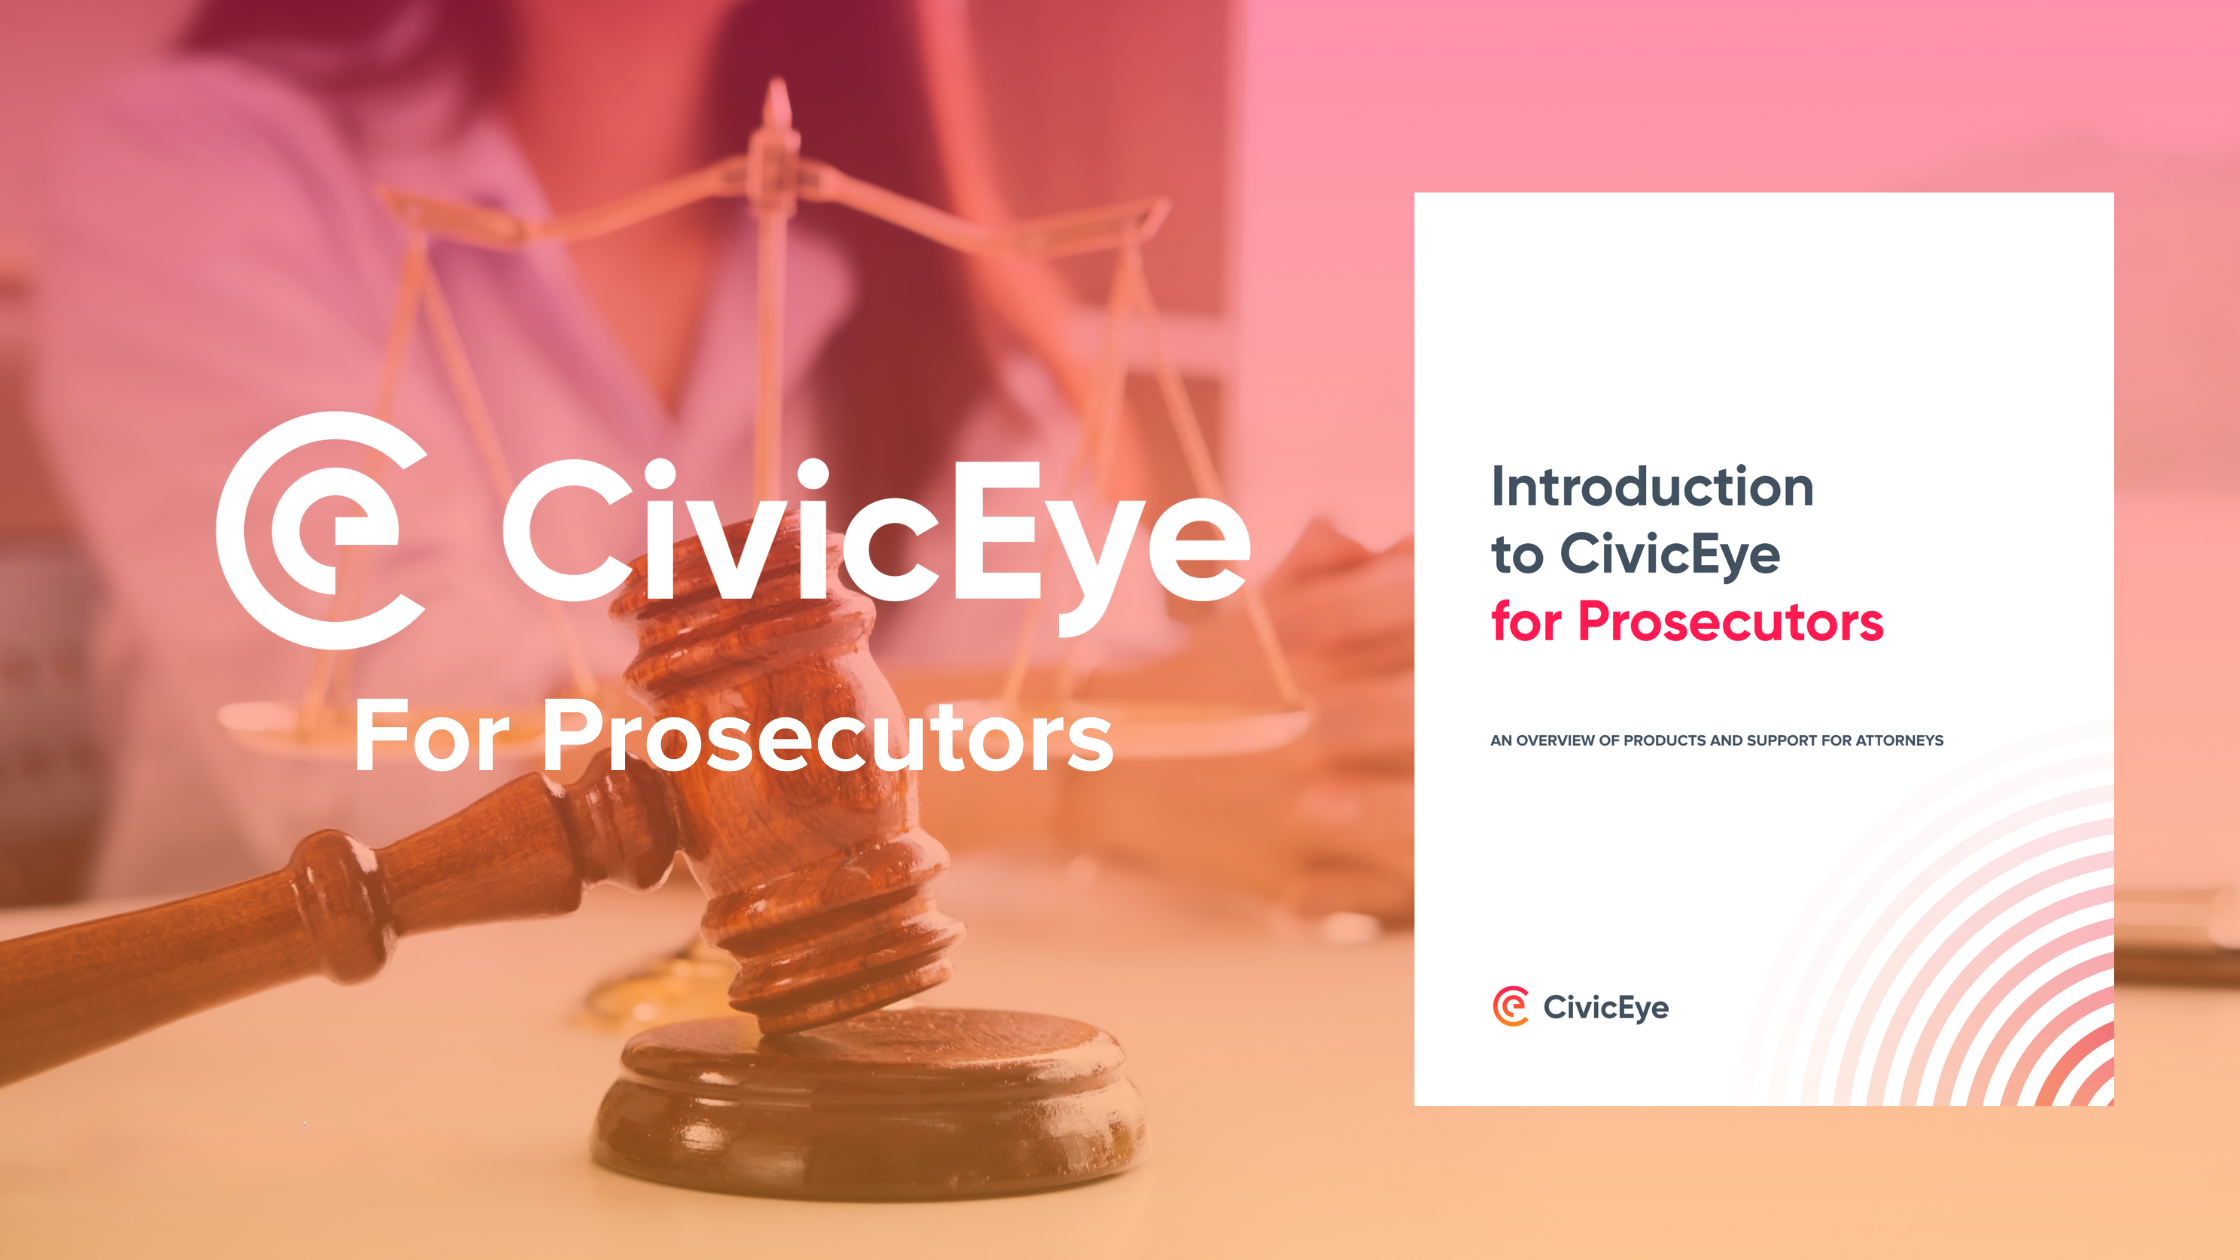 Explore the software and support by CivicEye for Prosecutors.